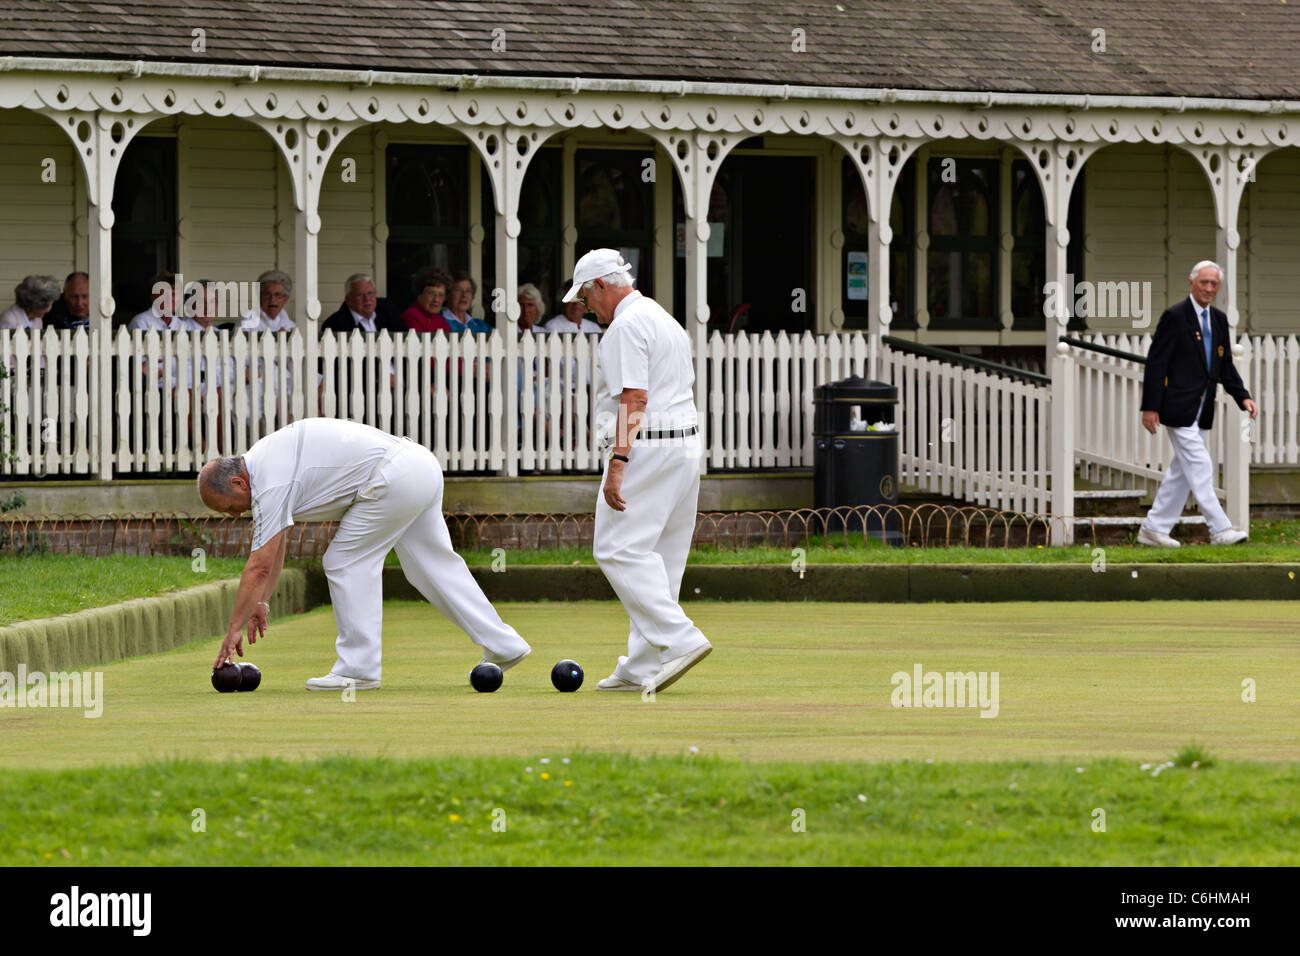 Senior gentlemen playing flat lawn green bowls picking up bowls in UK while other bowling club members look on appreciatively Stock Photo